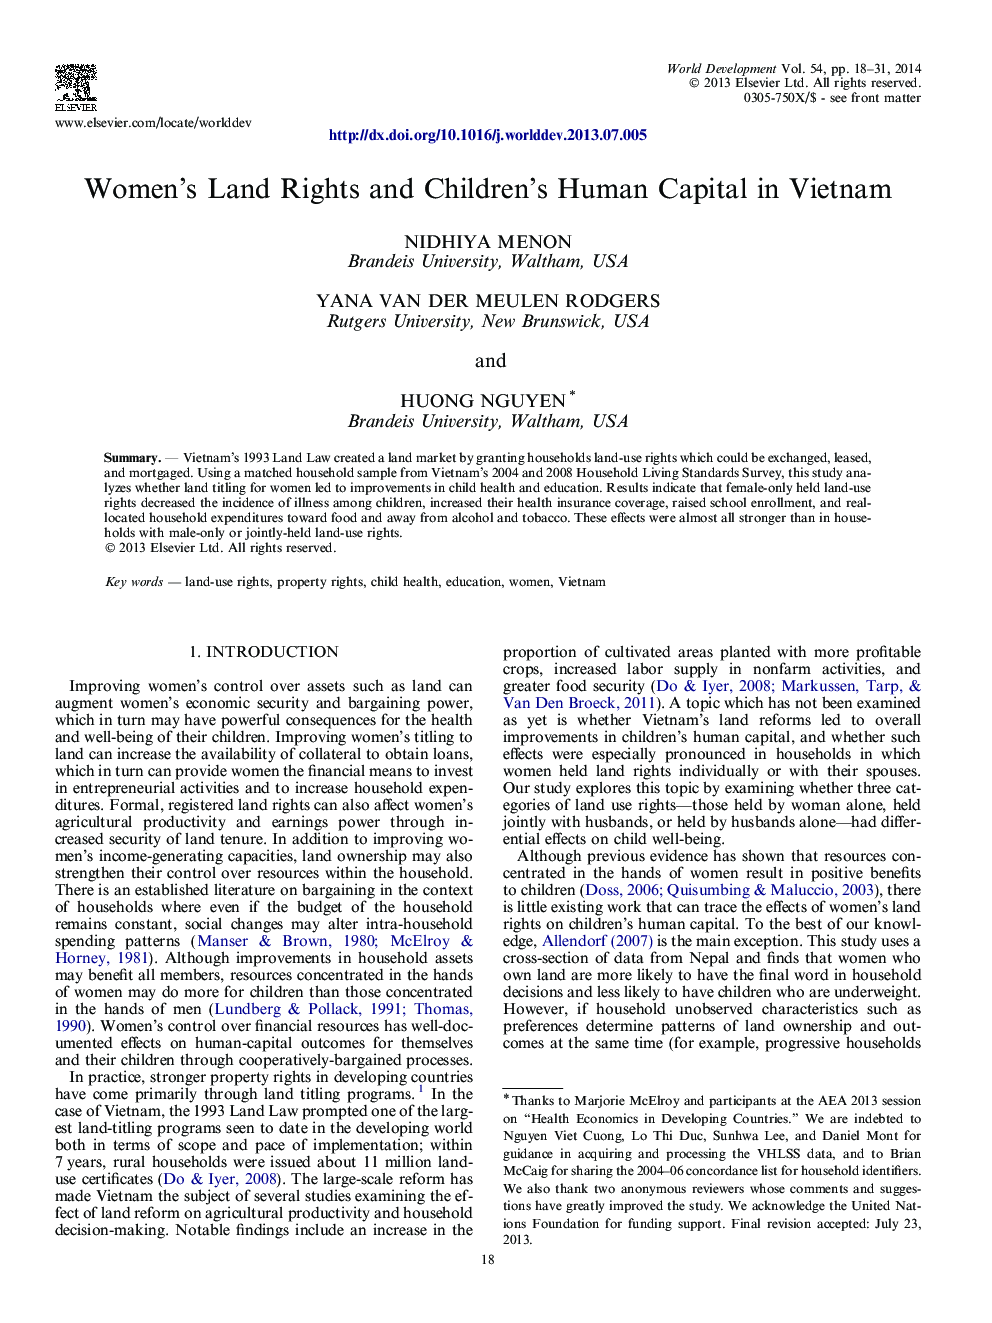 Women's Land Rights and Children's Human Capital in Vietnam